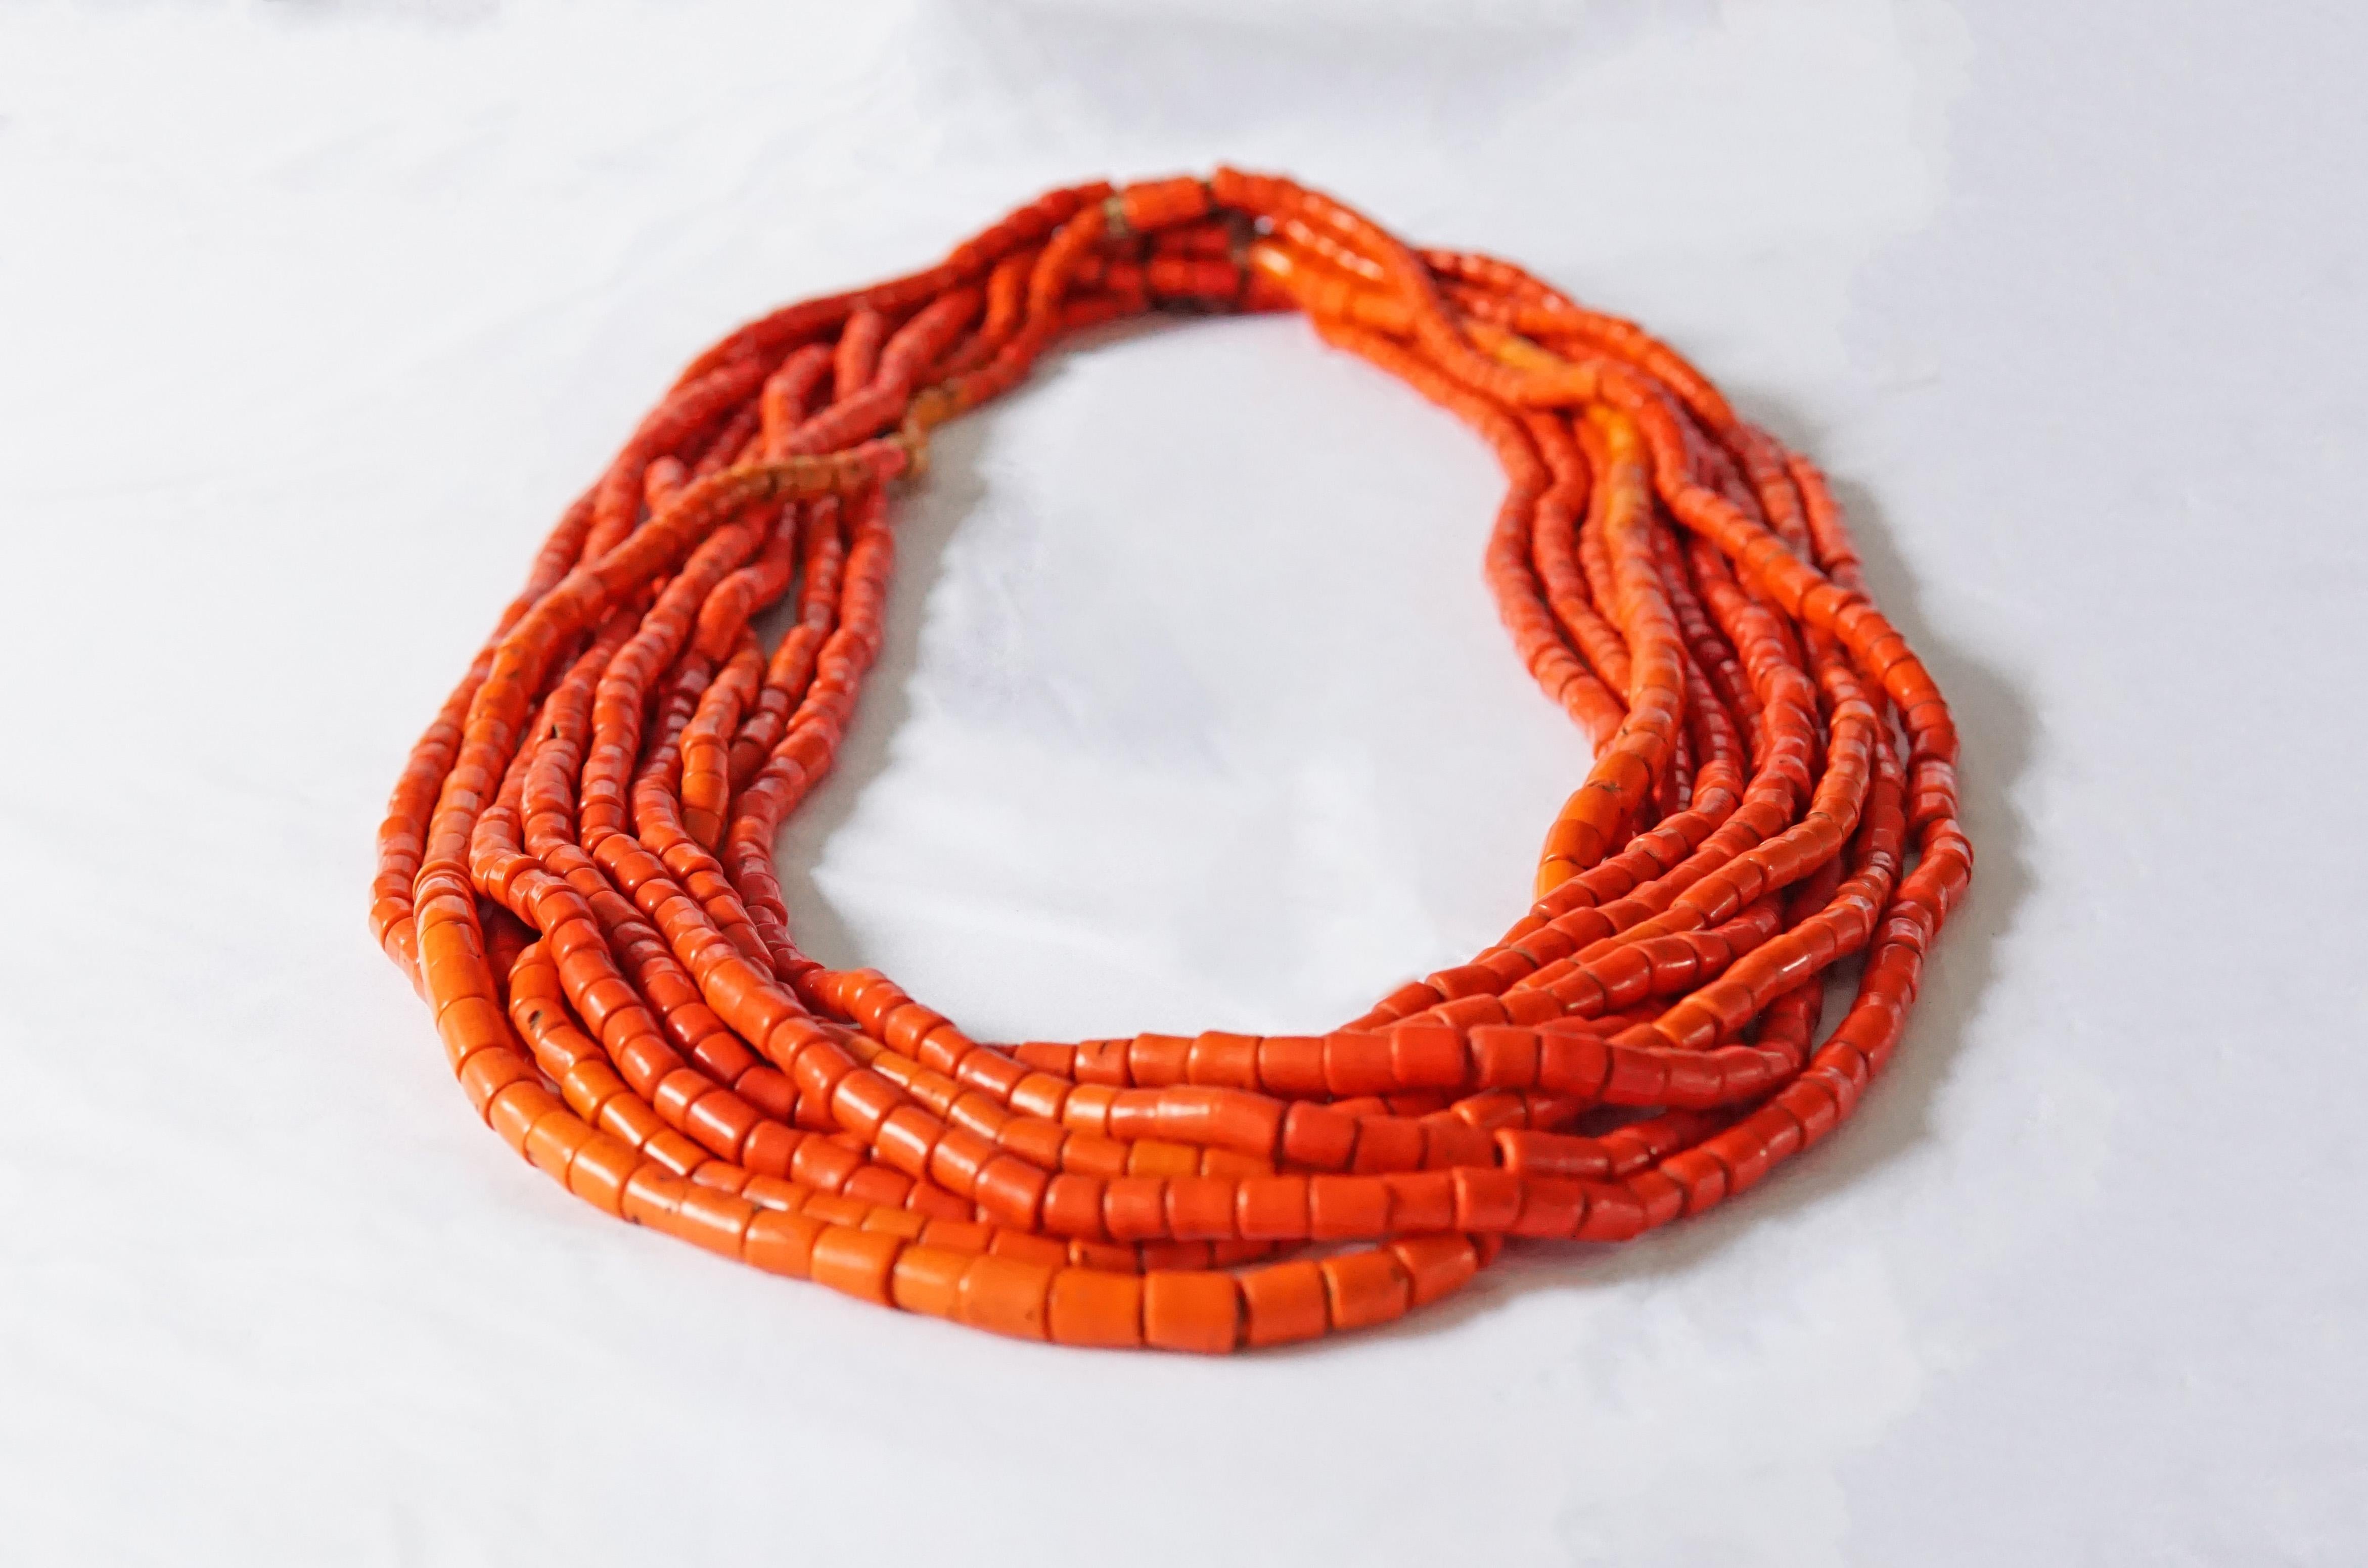 A 10-strand necklace hand-crafted from red-orange Naga beads from the early 20th century and strung with natural fibers. Necklaces such as these were a status symbol and an important item amidst women dowry. The beads are 